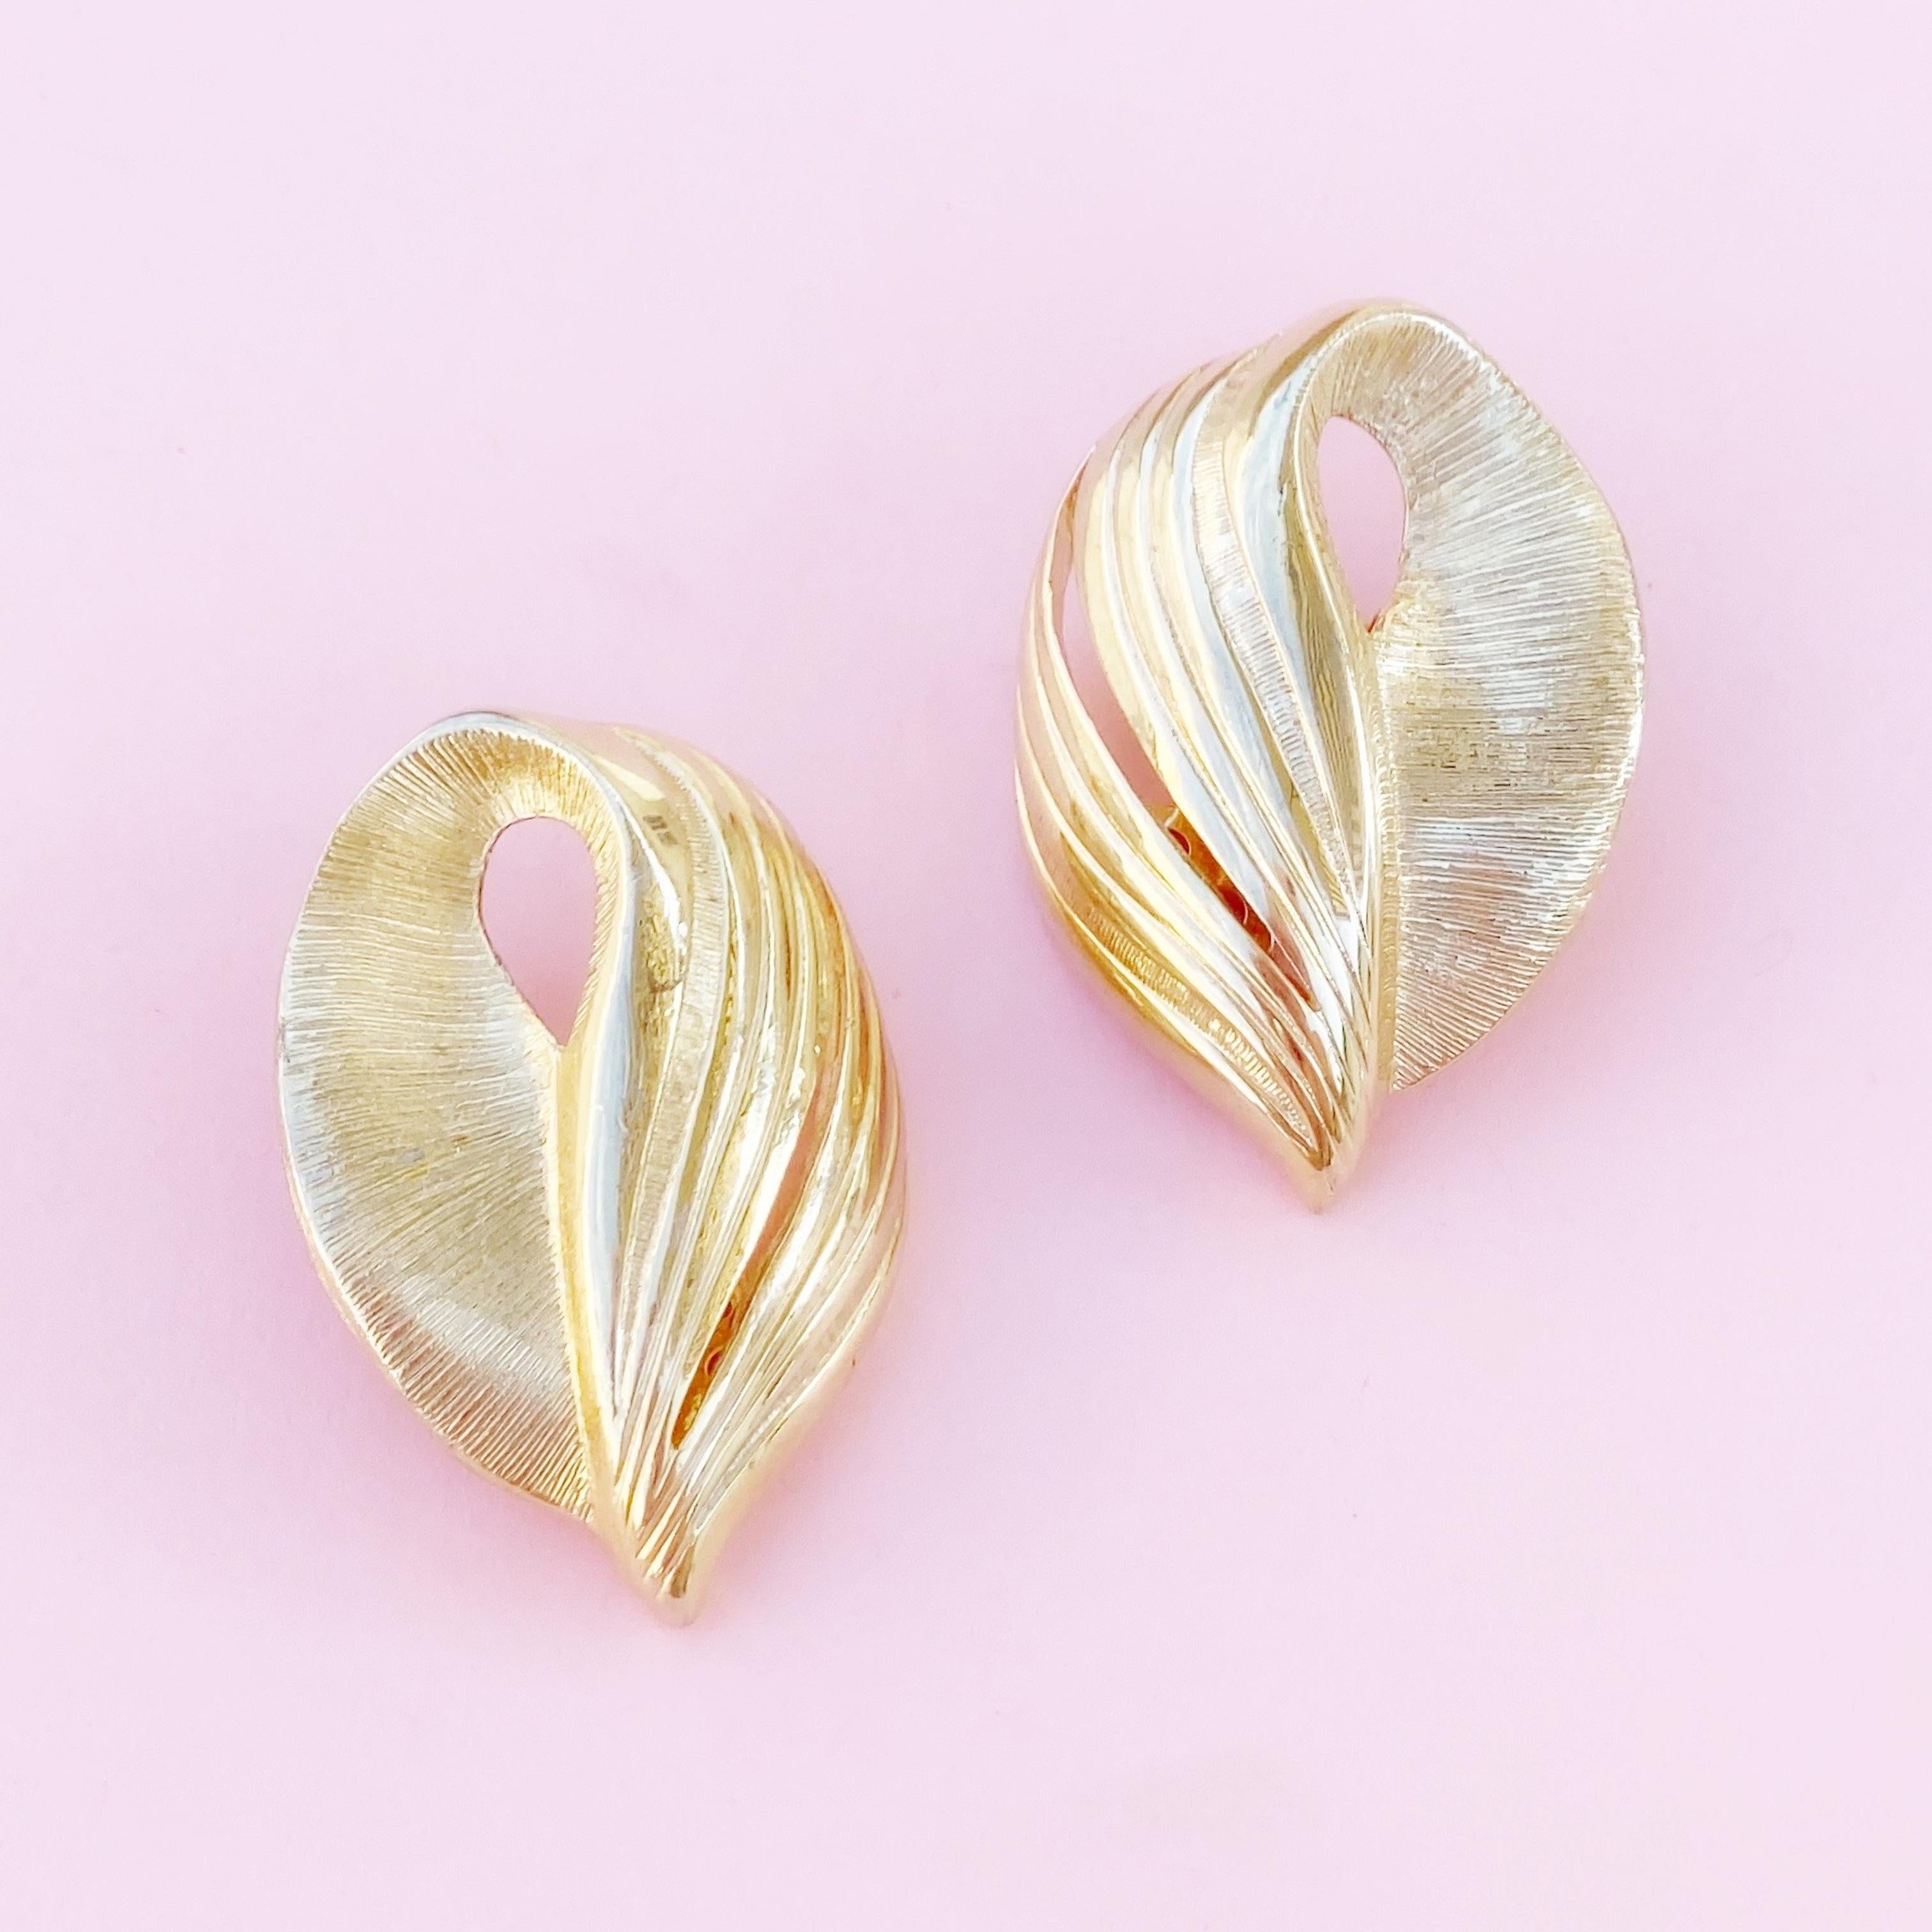 Gilded Textured Abstract Leaf Earrings, 1980s In Good Condition For Sale In McKinney, TX